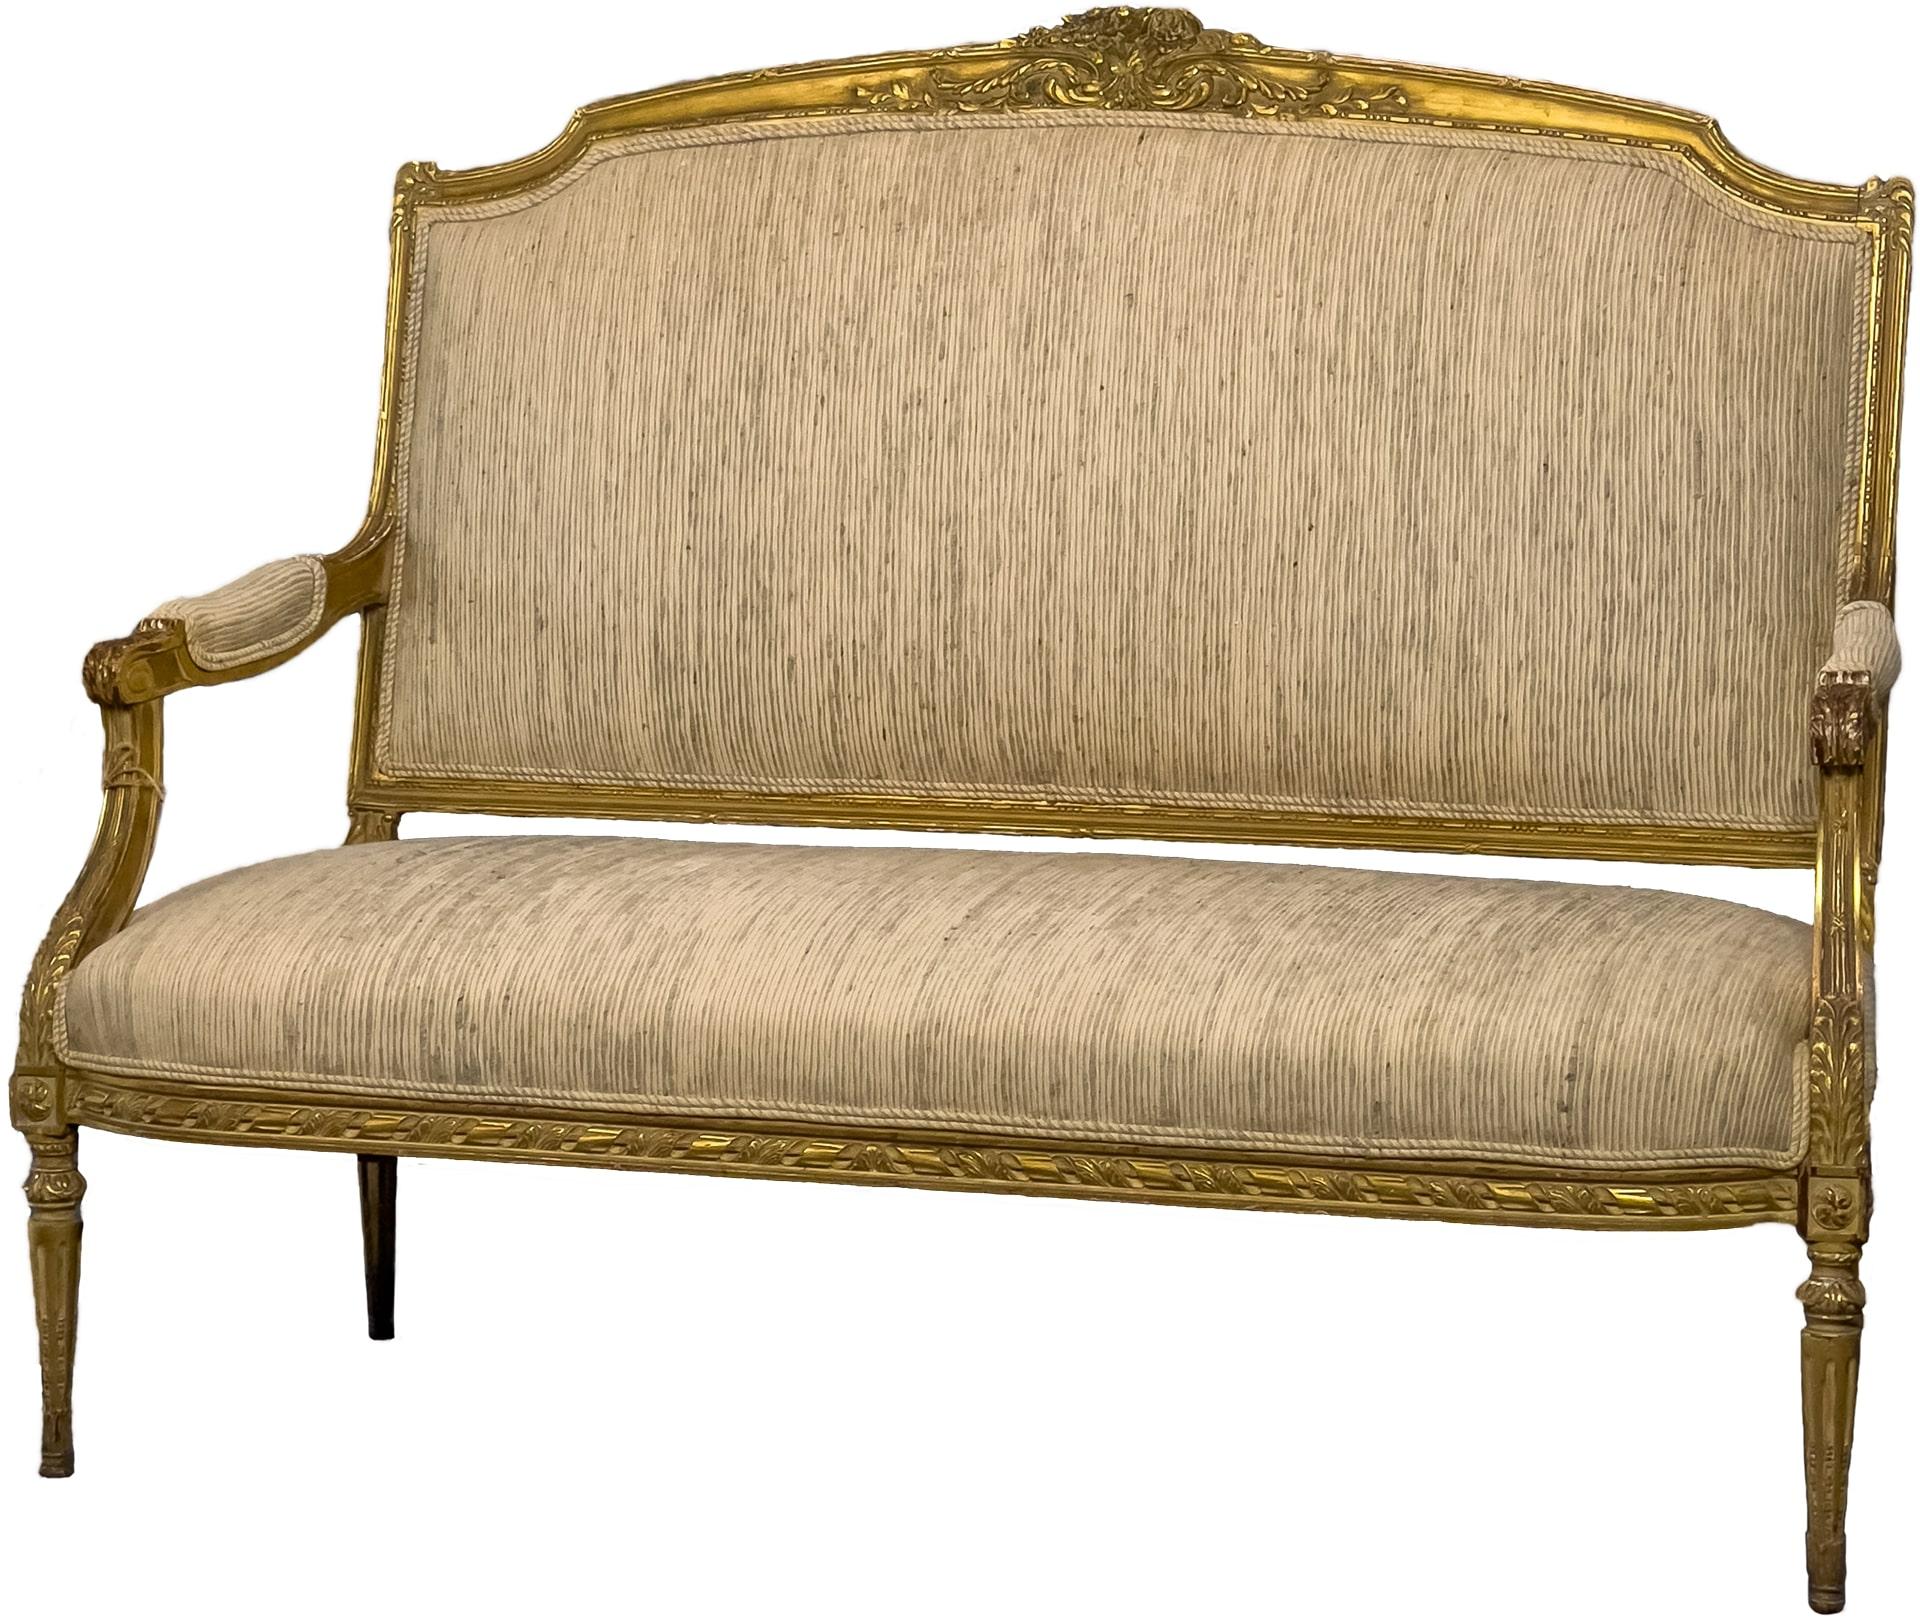 Beautiful antique Louis XVI gilt and wood settee. This settee originates from France and has beautiful carvings along its borders.